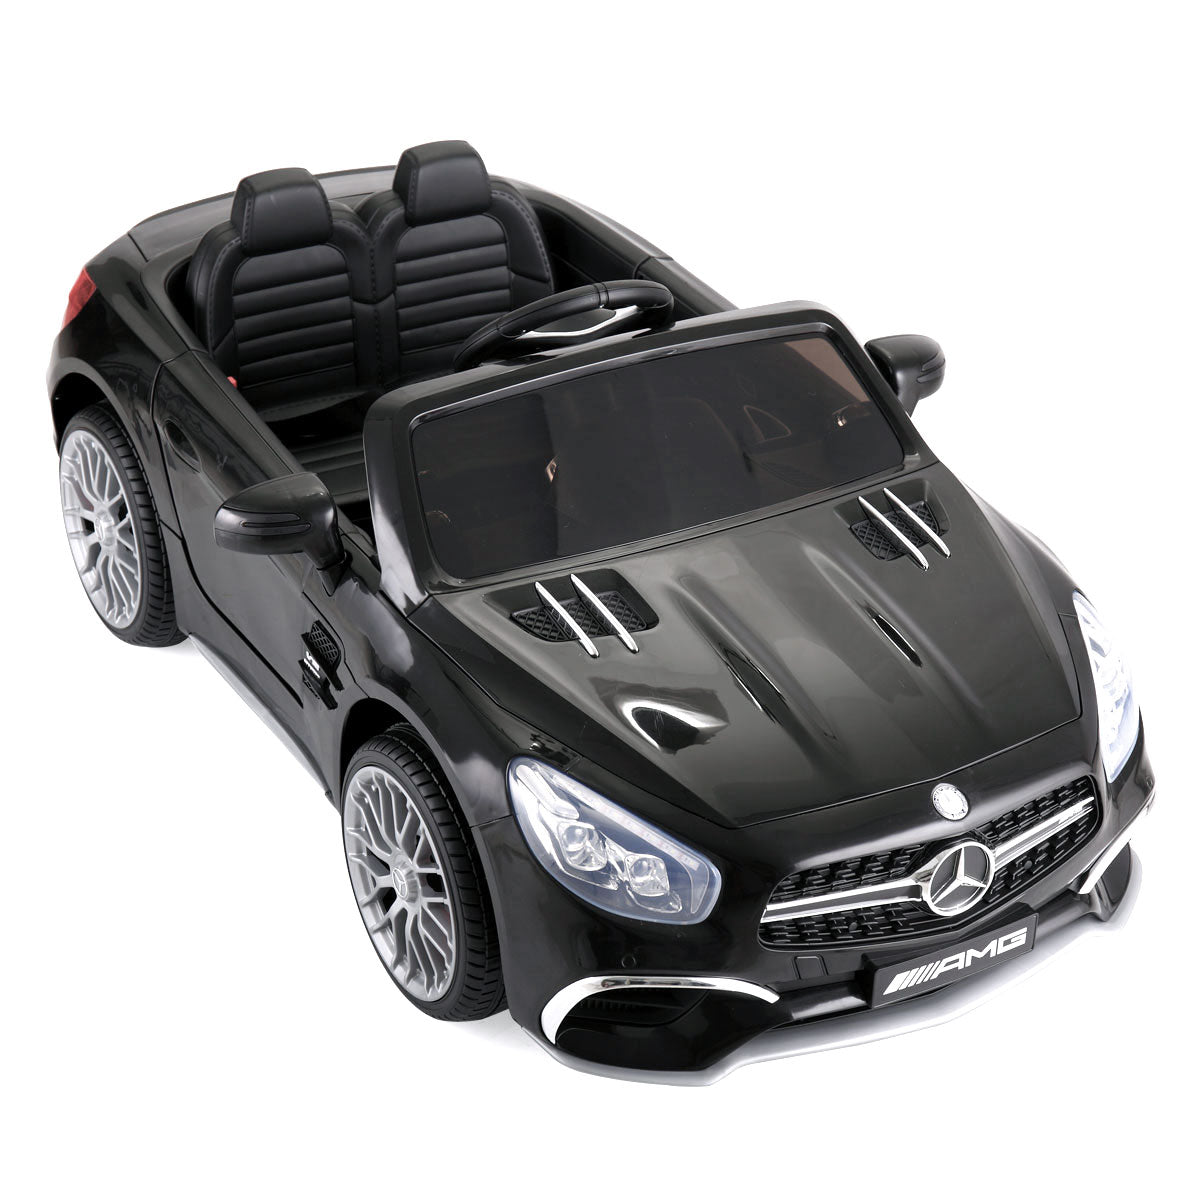 2 Seater Kids Ride On Car, Mercedes Benz Licensed Electric Car for Kids, Power Vehicle with Remote Control, 3 Speeds, LED Lights, MP3 Player, USB Port, Gift for Age 1-5 Years, K1402